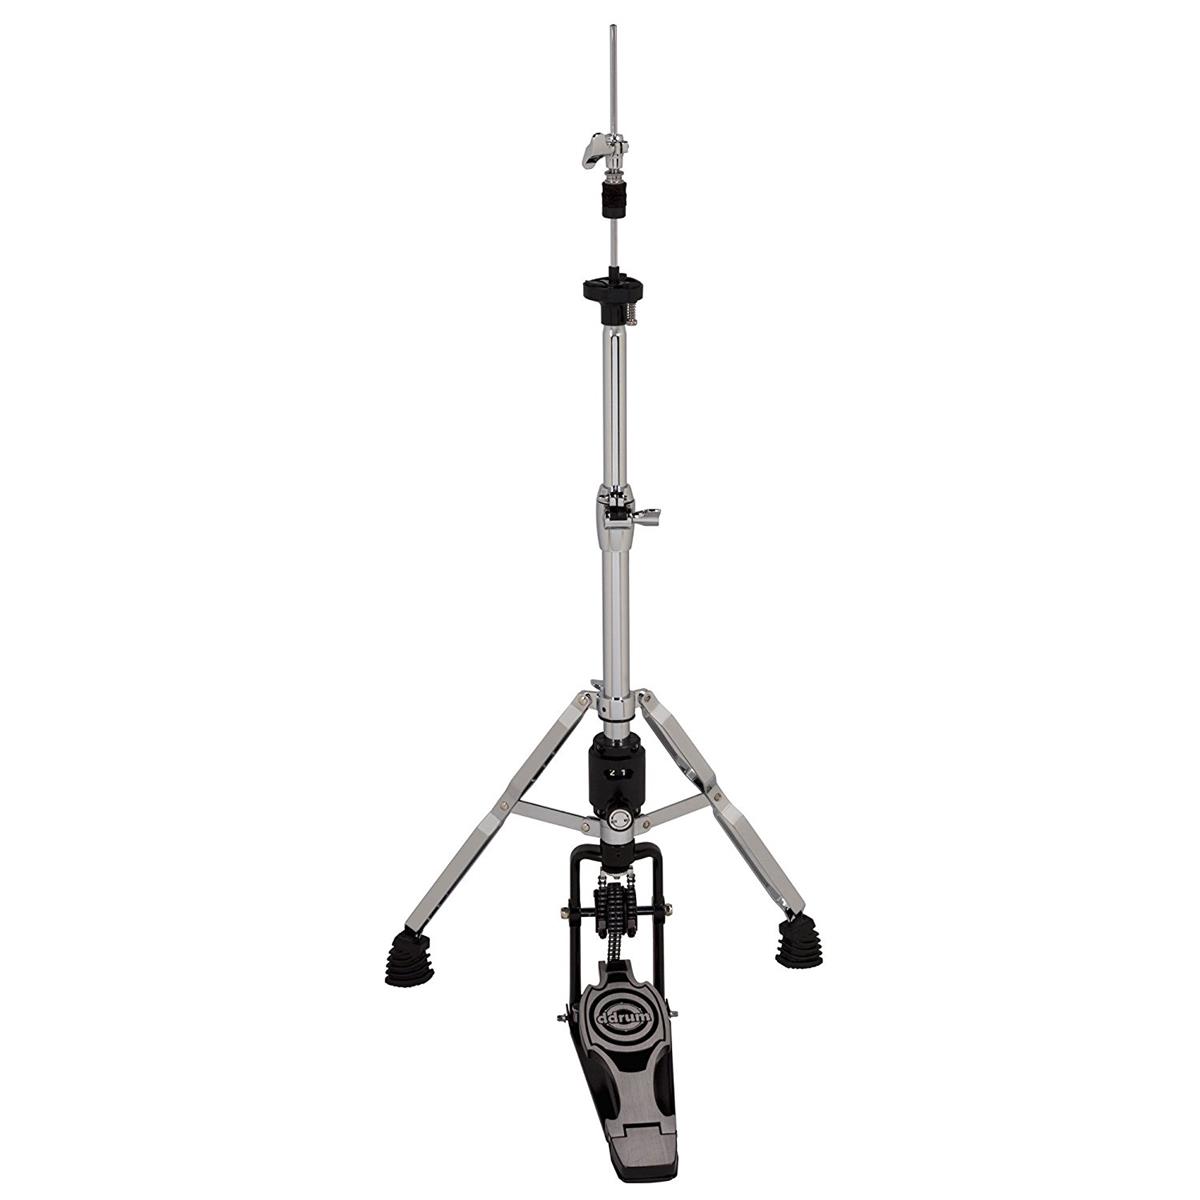 Image of Ddrum RX Pro Series 2 Legged Hi Hat Stand